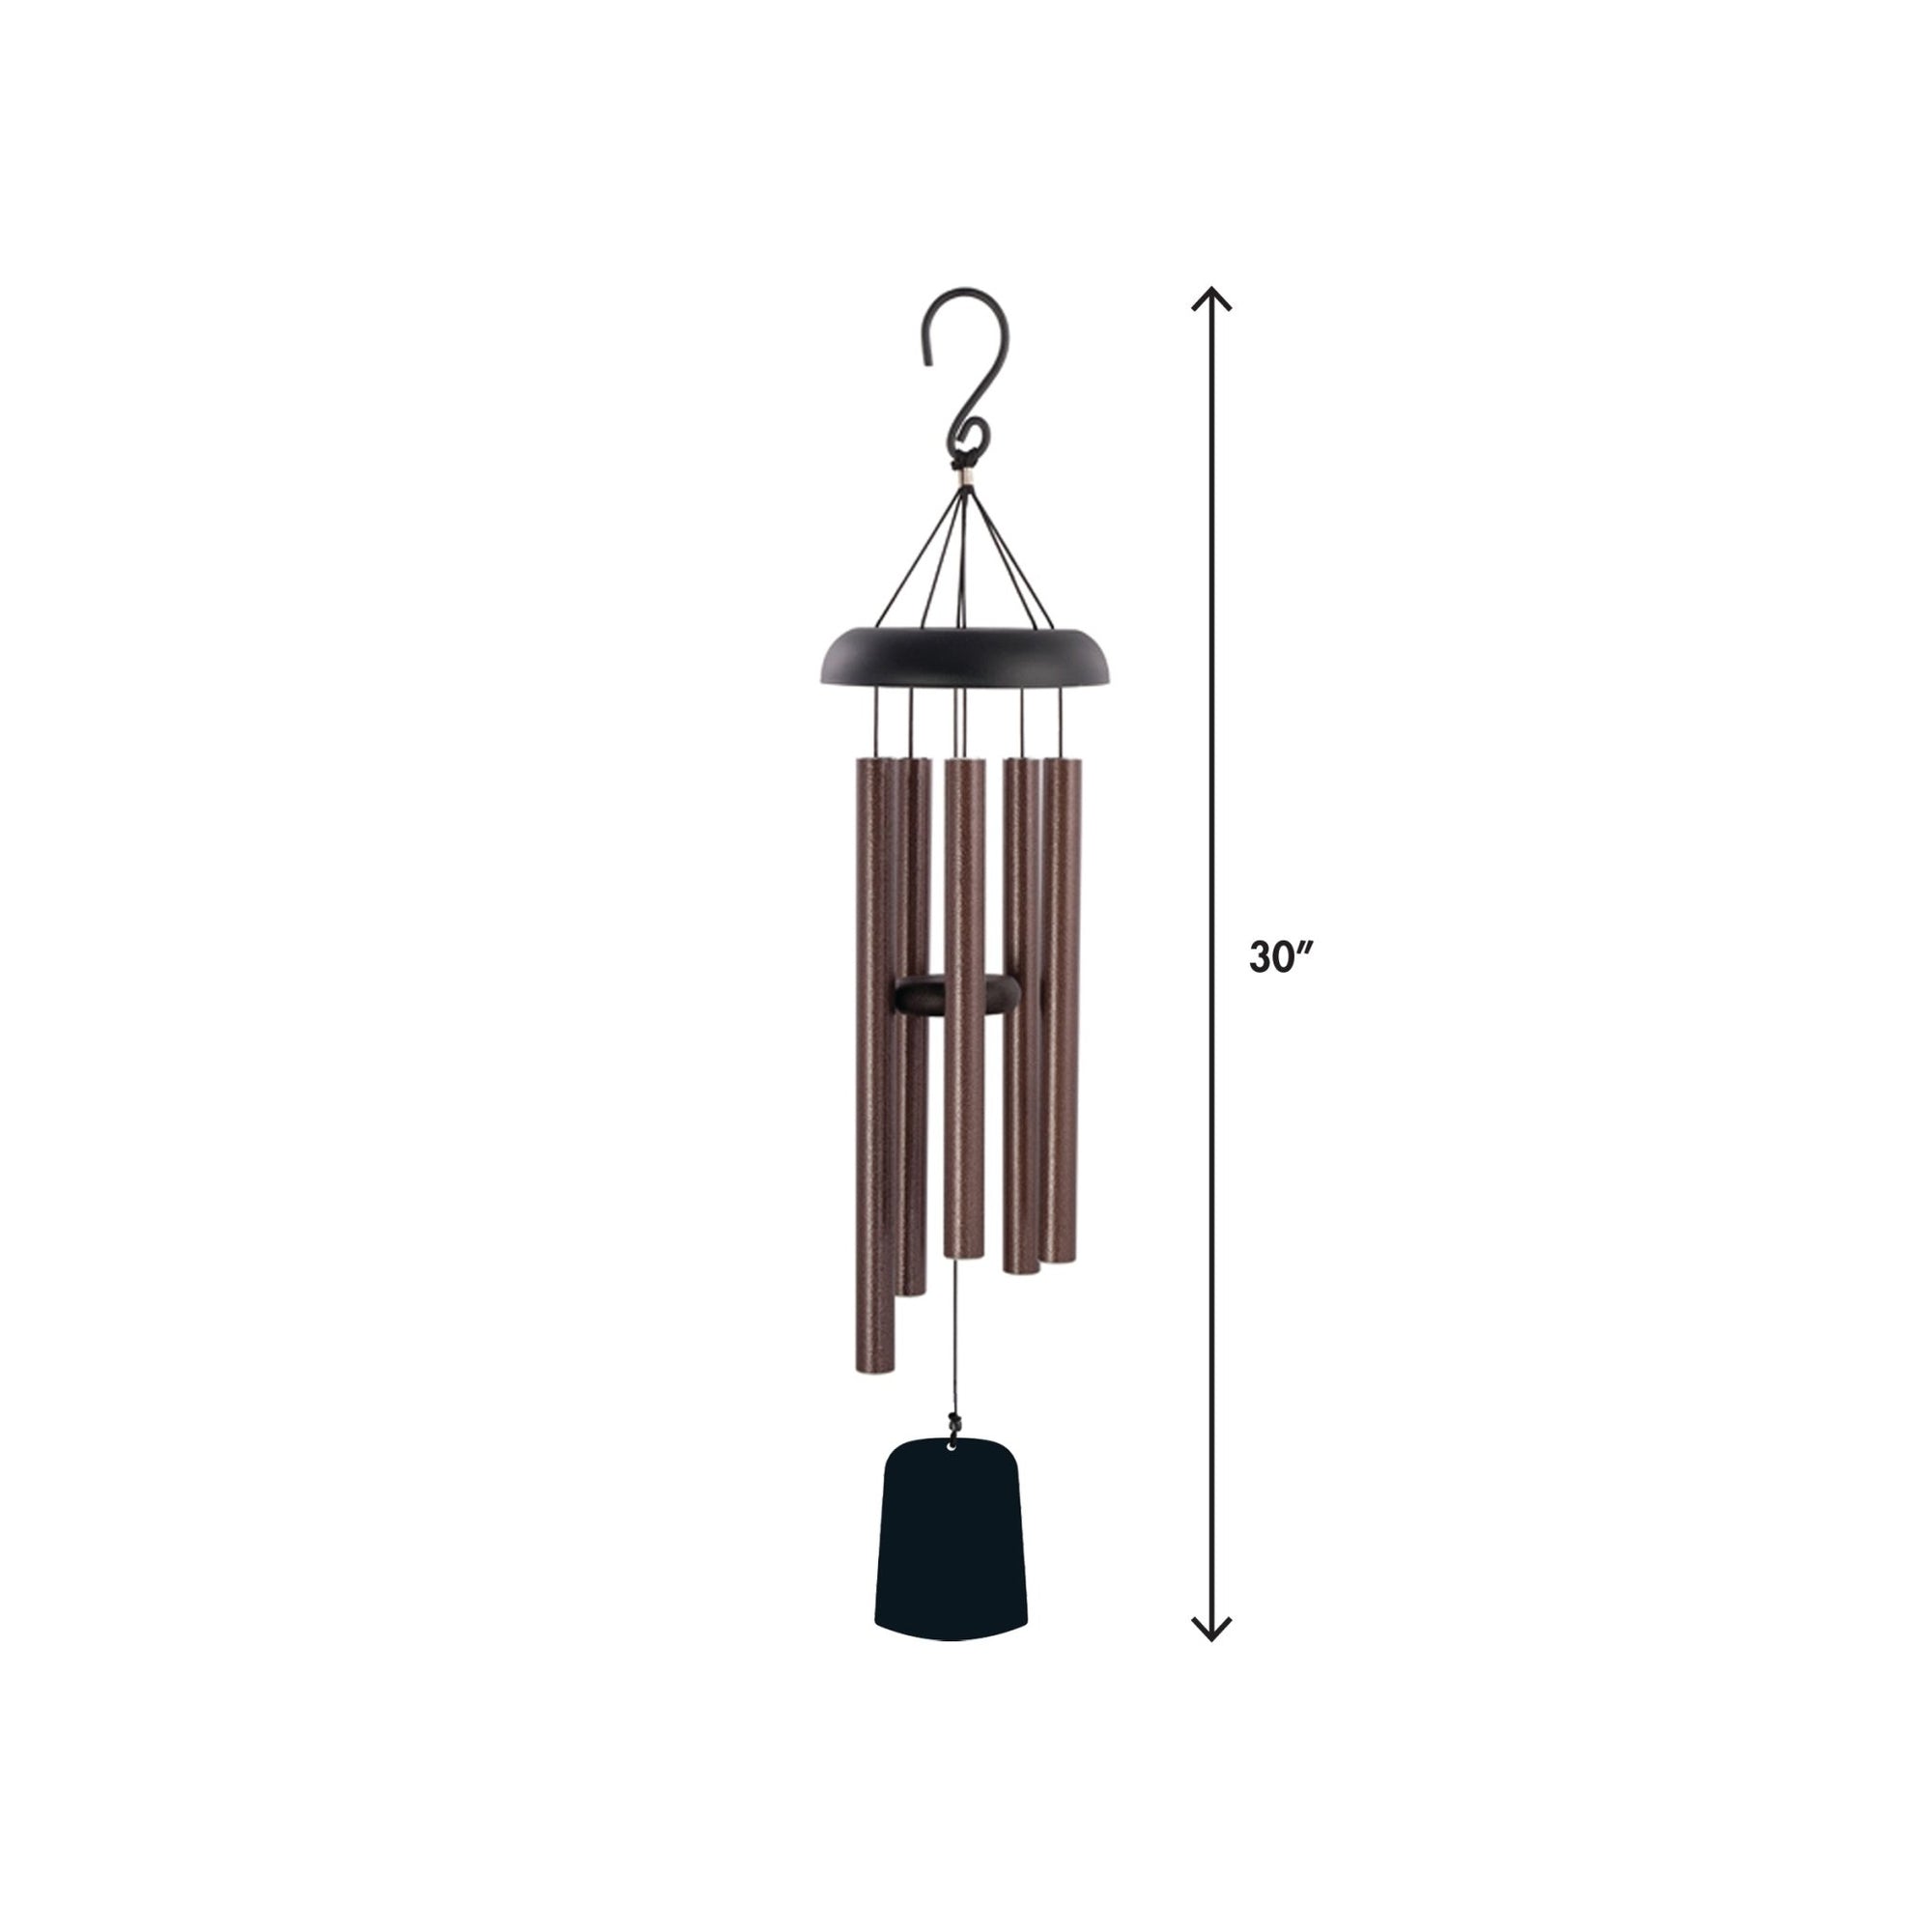 Personalized Memorial Wind Chime Sail Sympathy Gift - A Limb Has Fallen - LifeSong Milestones